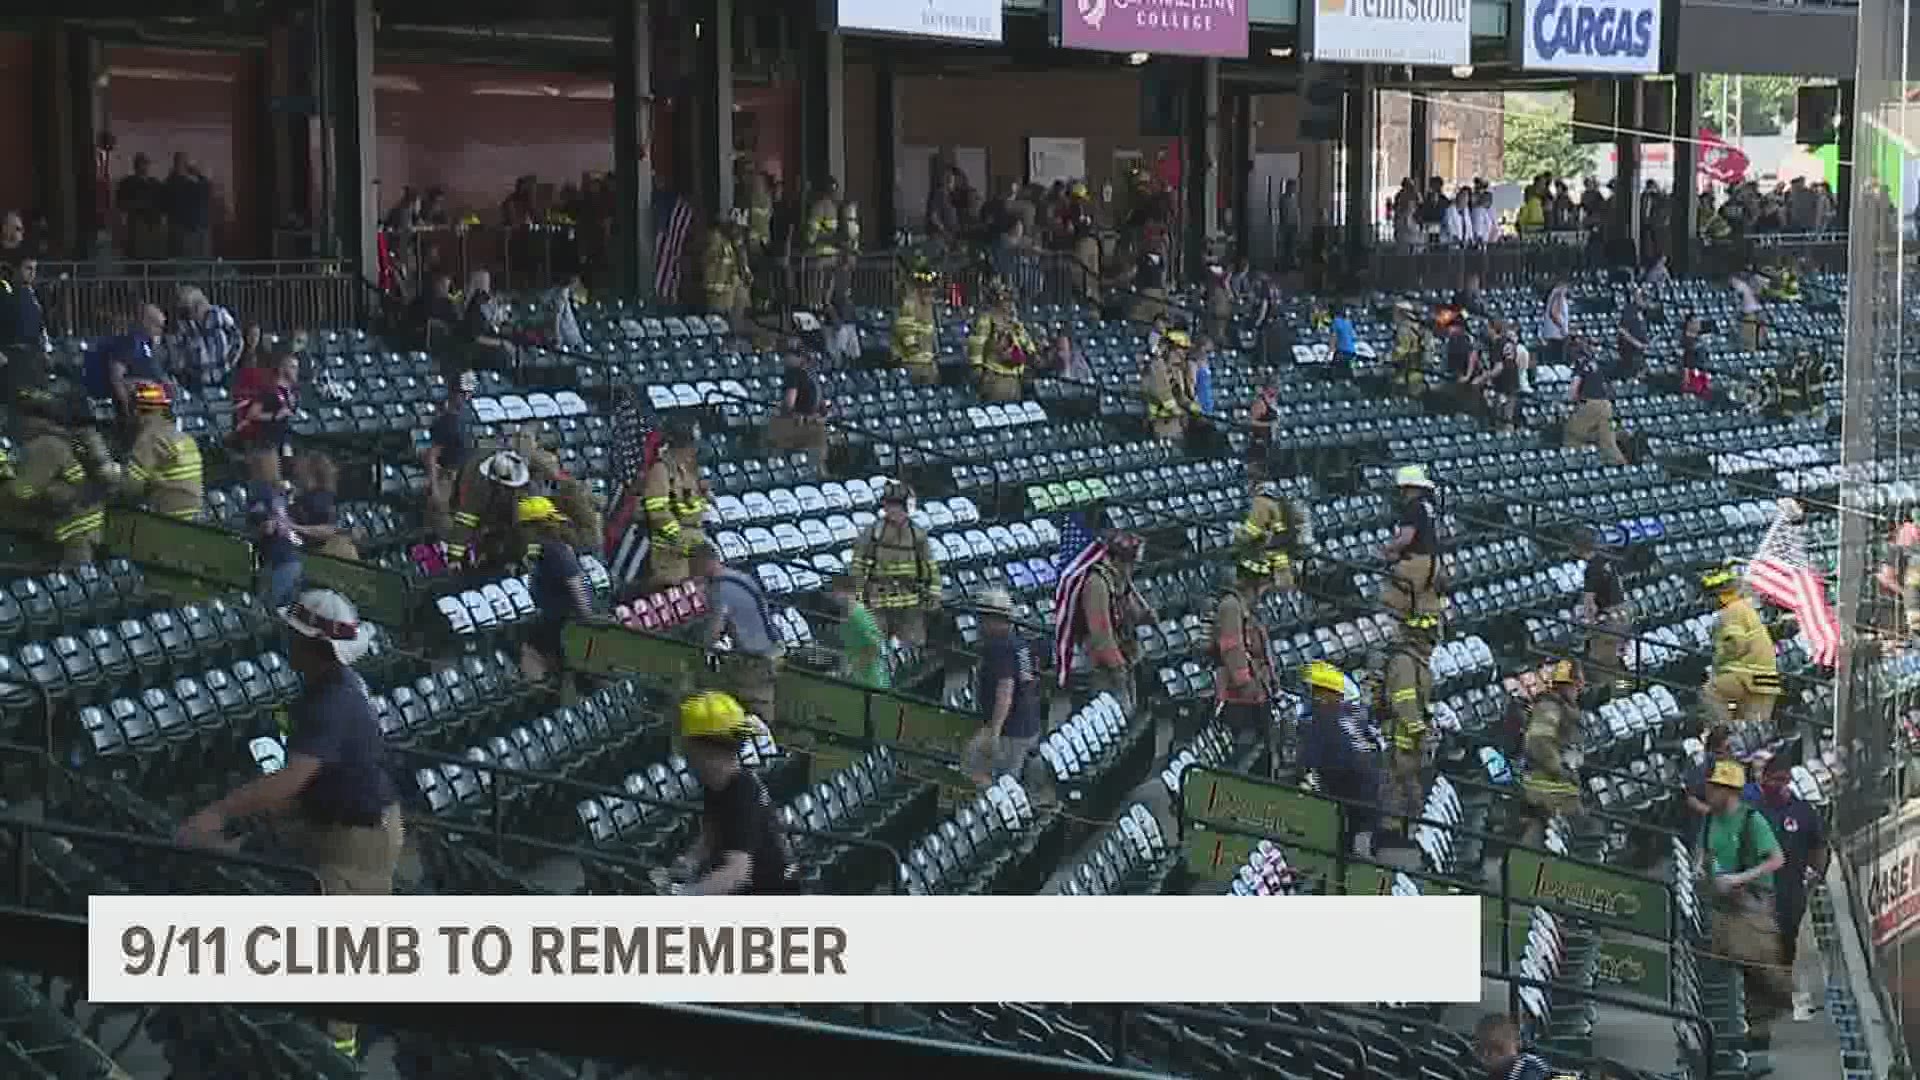 Dozens of people in Lancaster are honoring the 343 firefighters who bravely lost their lives trying to save others during the 9/11 attacks.